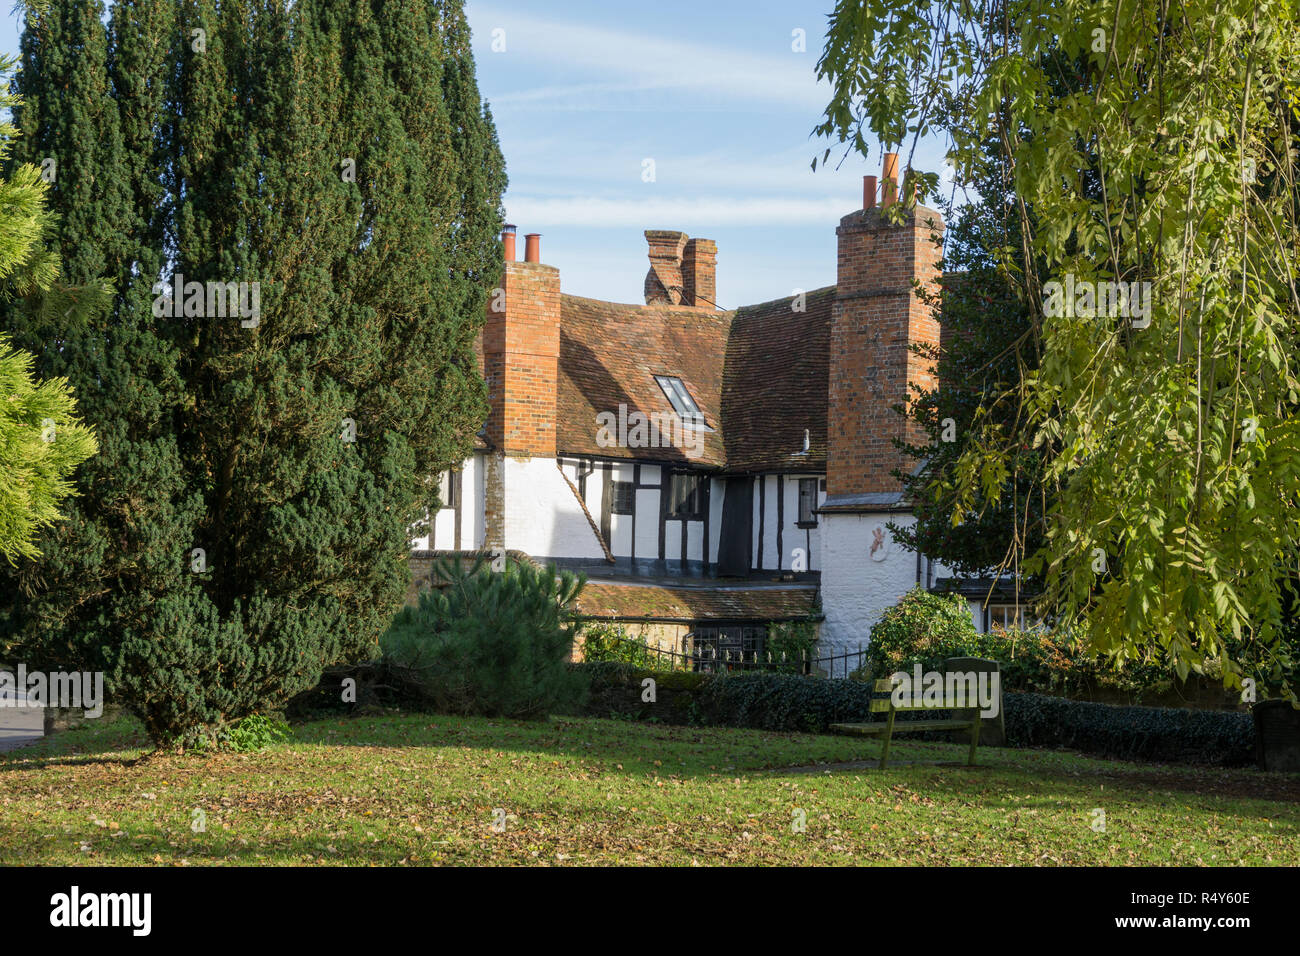 The Twisted Chimney House viewed from the Old Churchyard, Buckingham, UK; an Elizabethan house noted for its distinctive twisted red brick chimney. Stock Photo